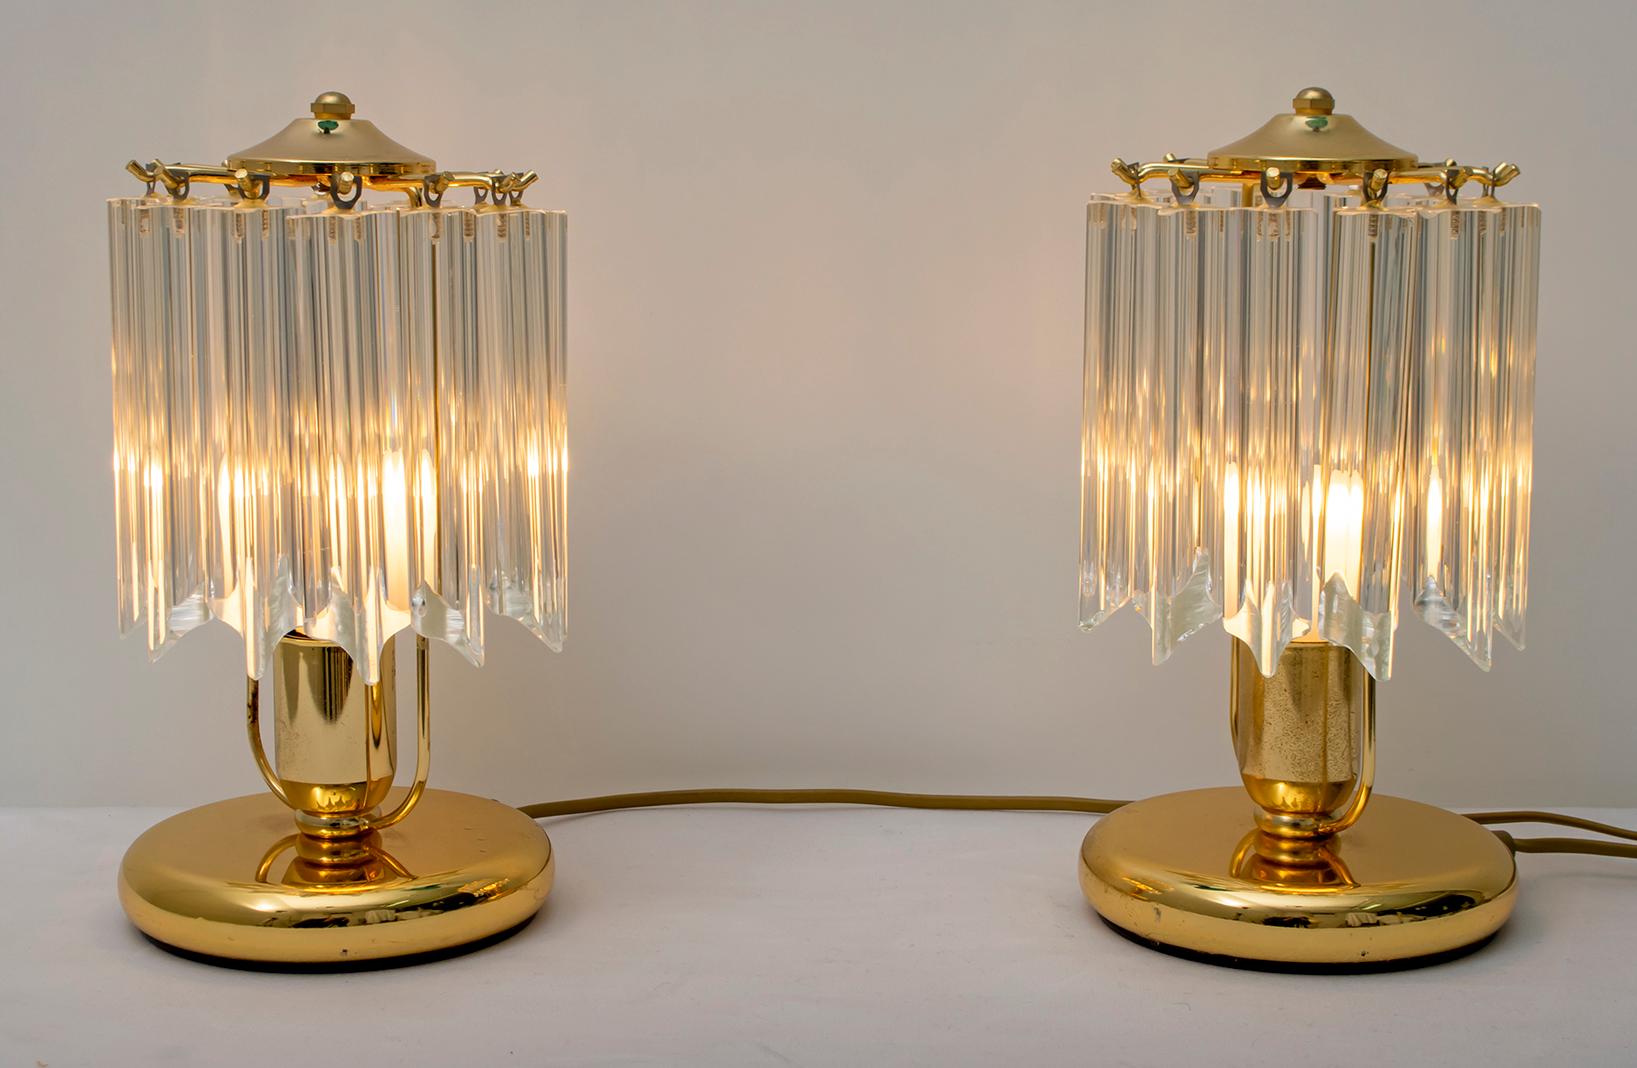 This pair of table lamps has a brass structure and 12 